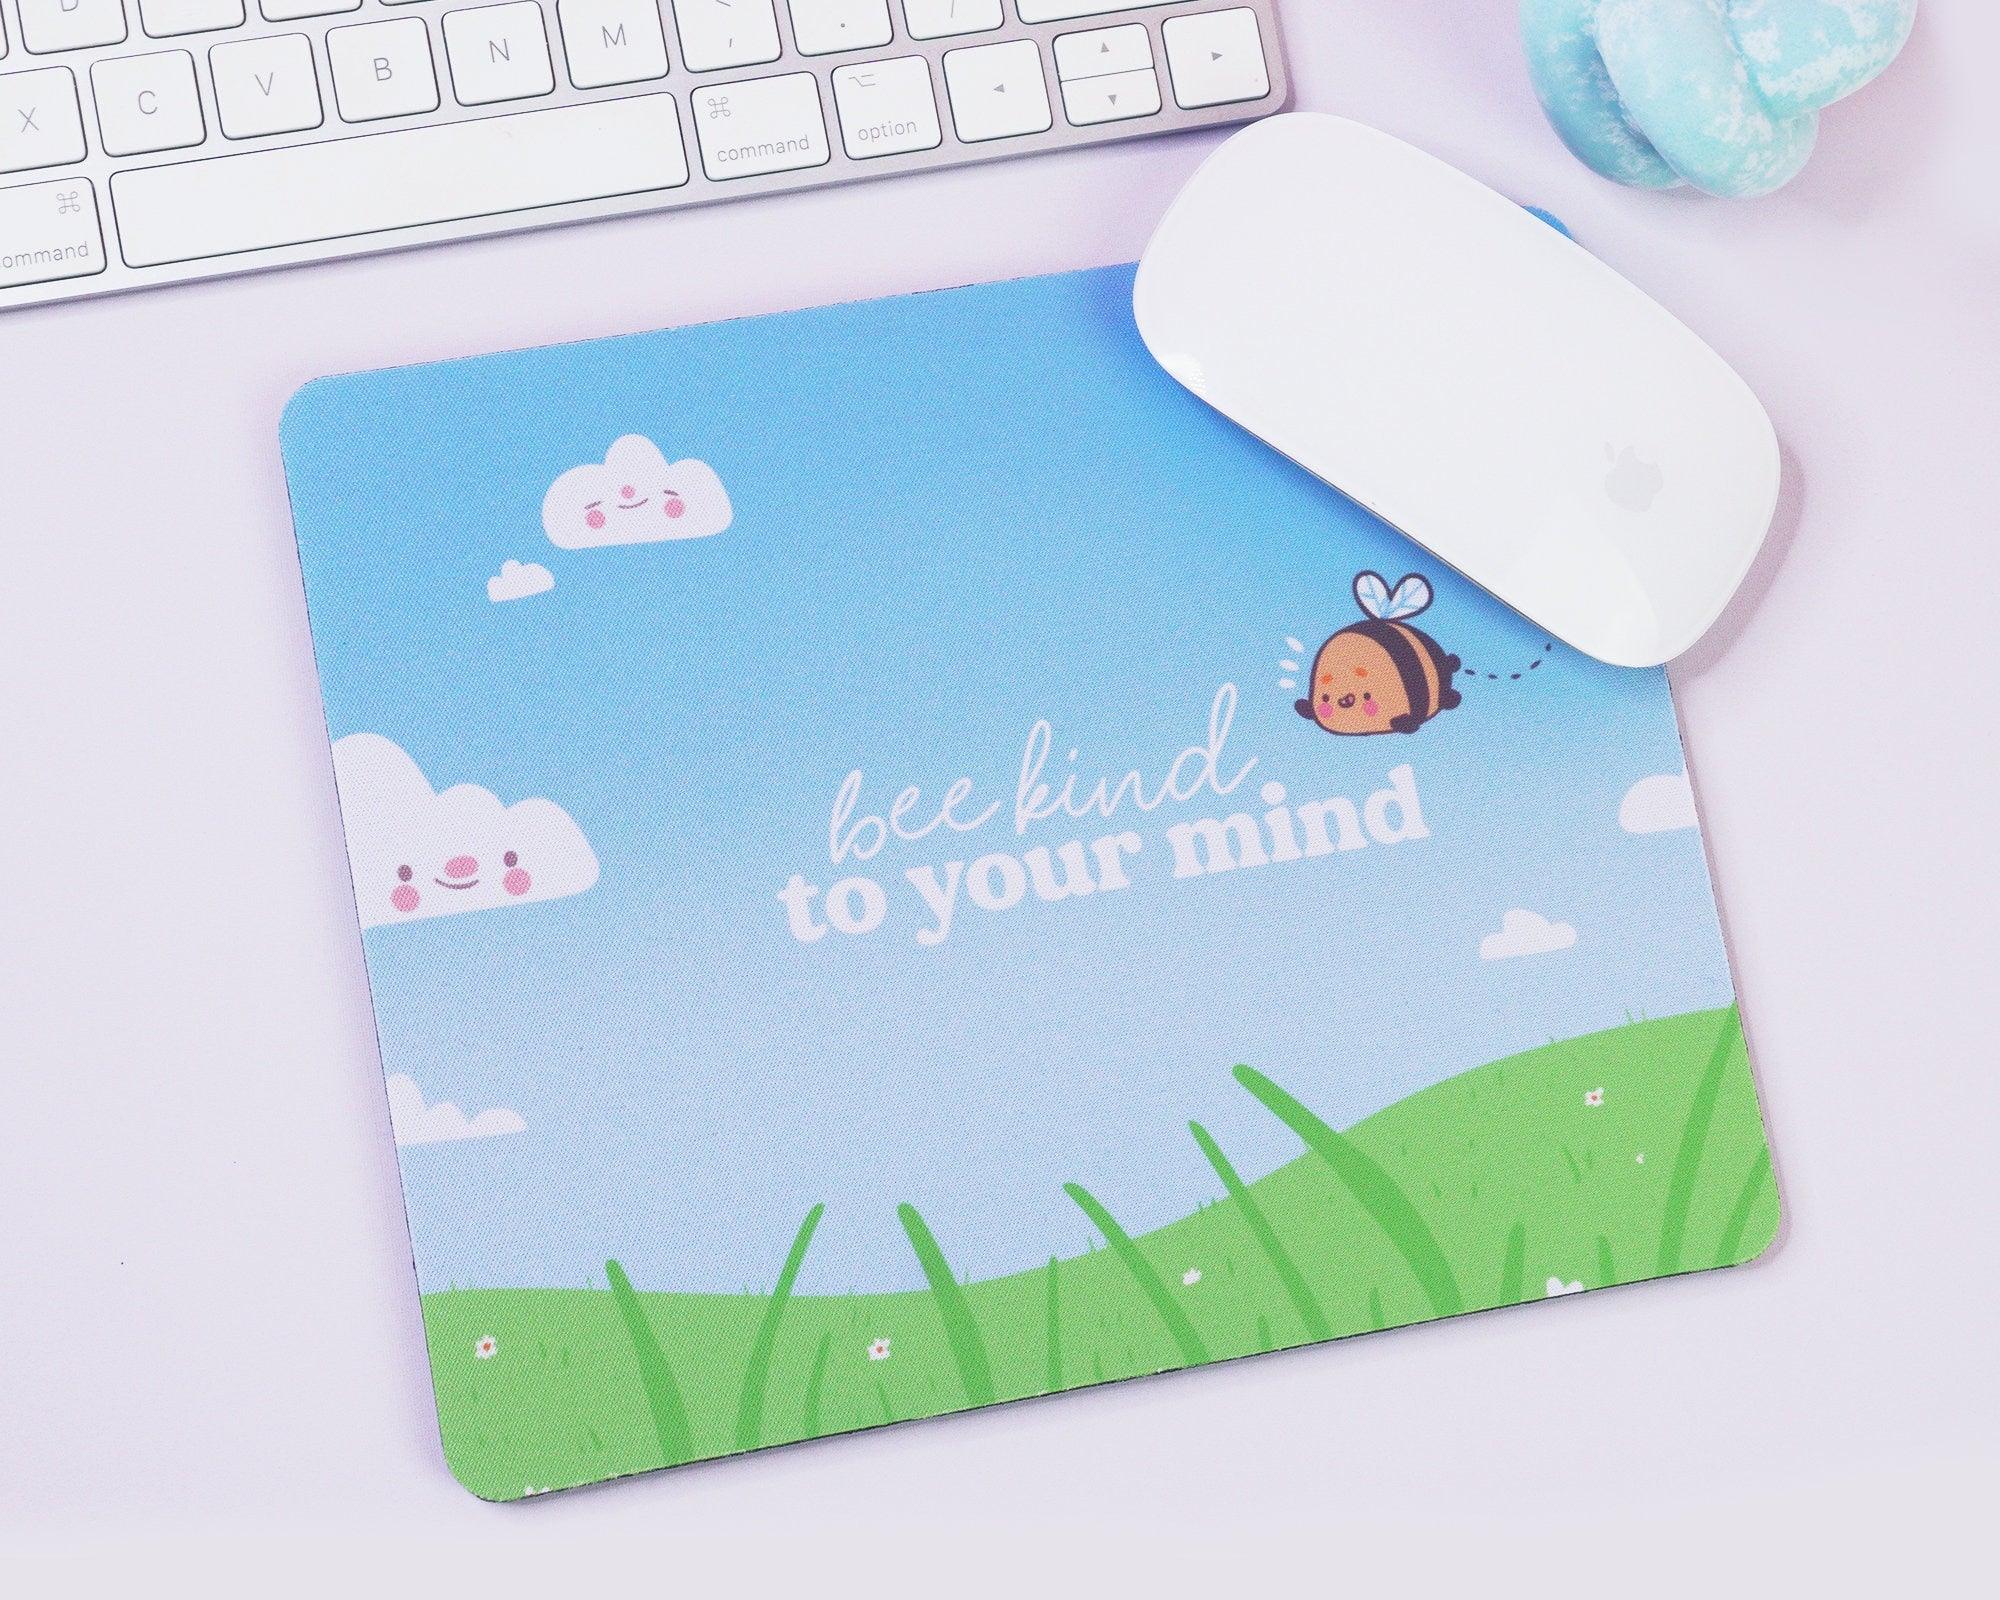 Adorable Bumblebutt Mouse Pad - Hand-printed original design to brighten up your workspace.